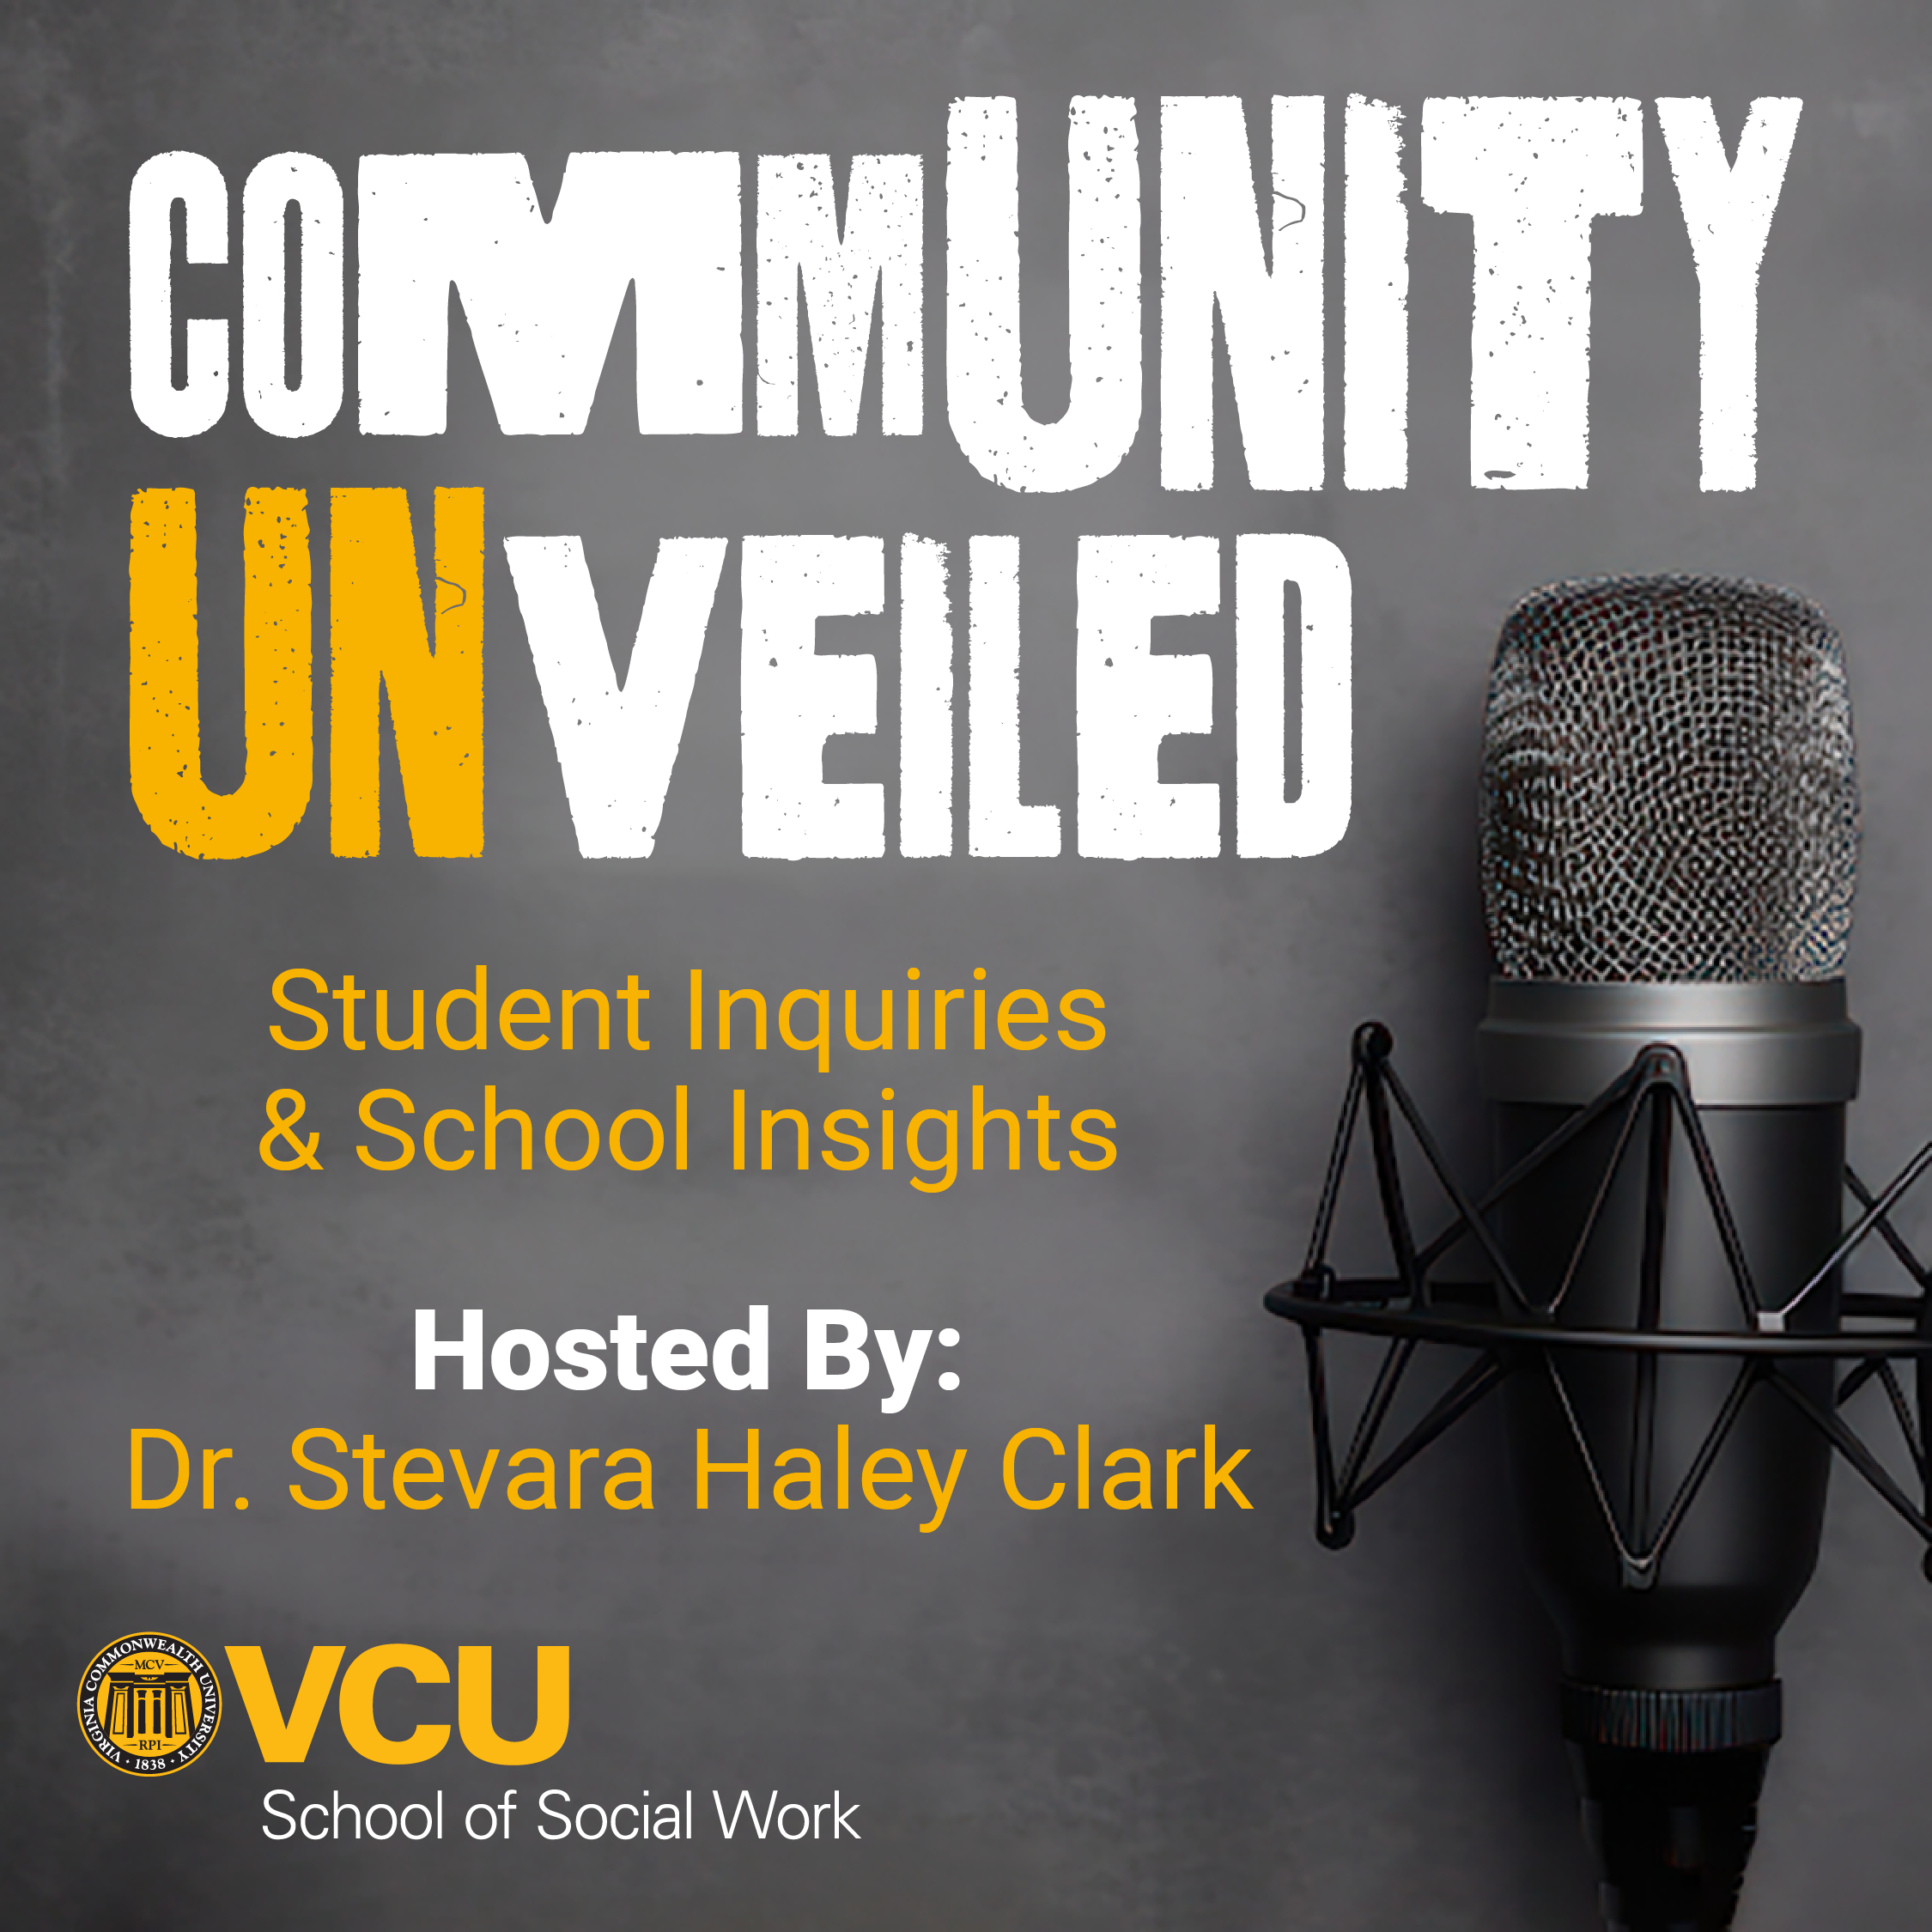 Community unveiled: Student inquires and school insights. Hosted by Dr. Stevara Haley Clark. VCU School of Social Work